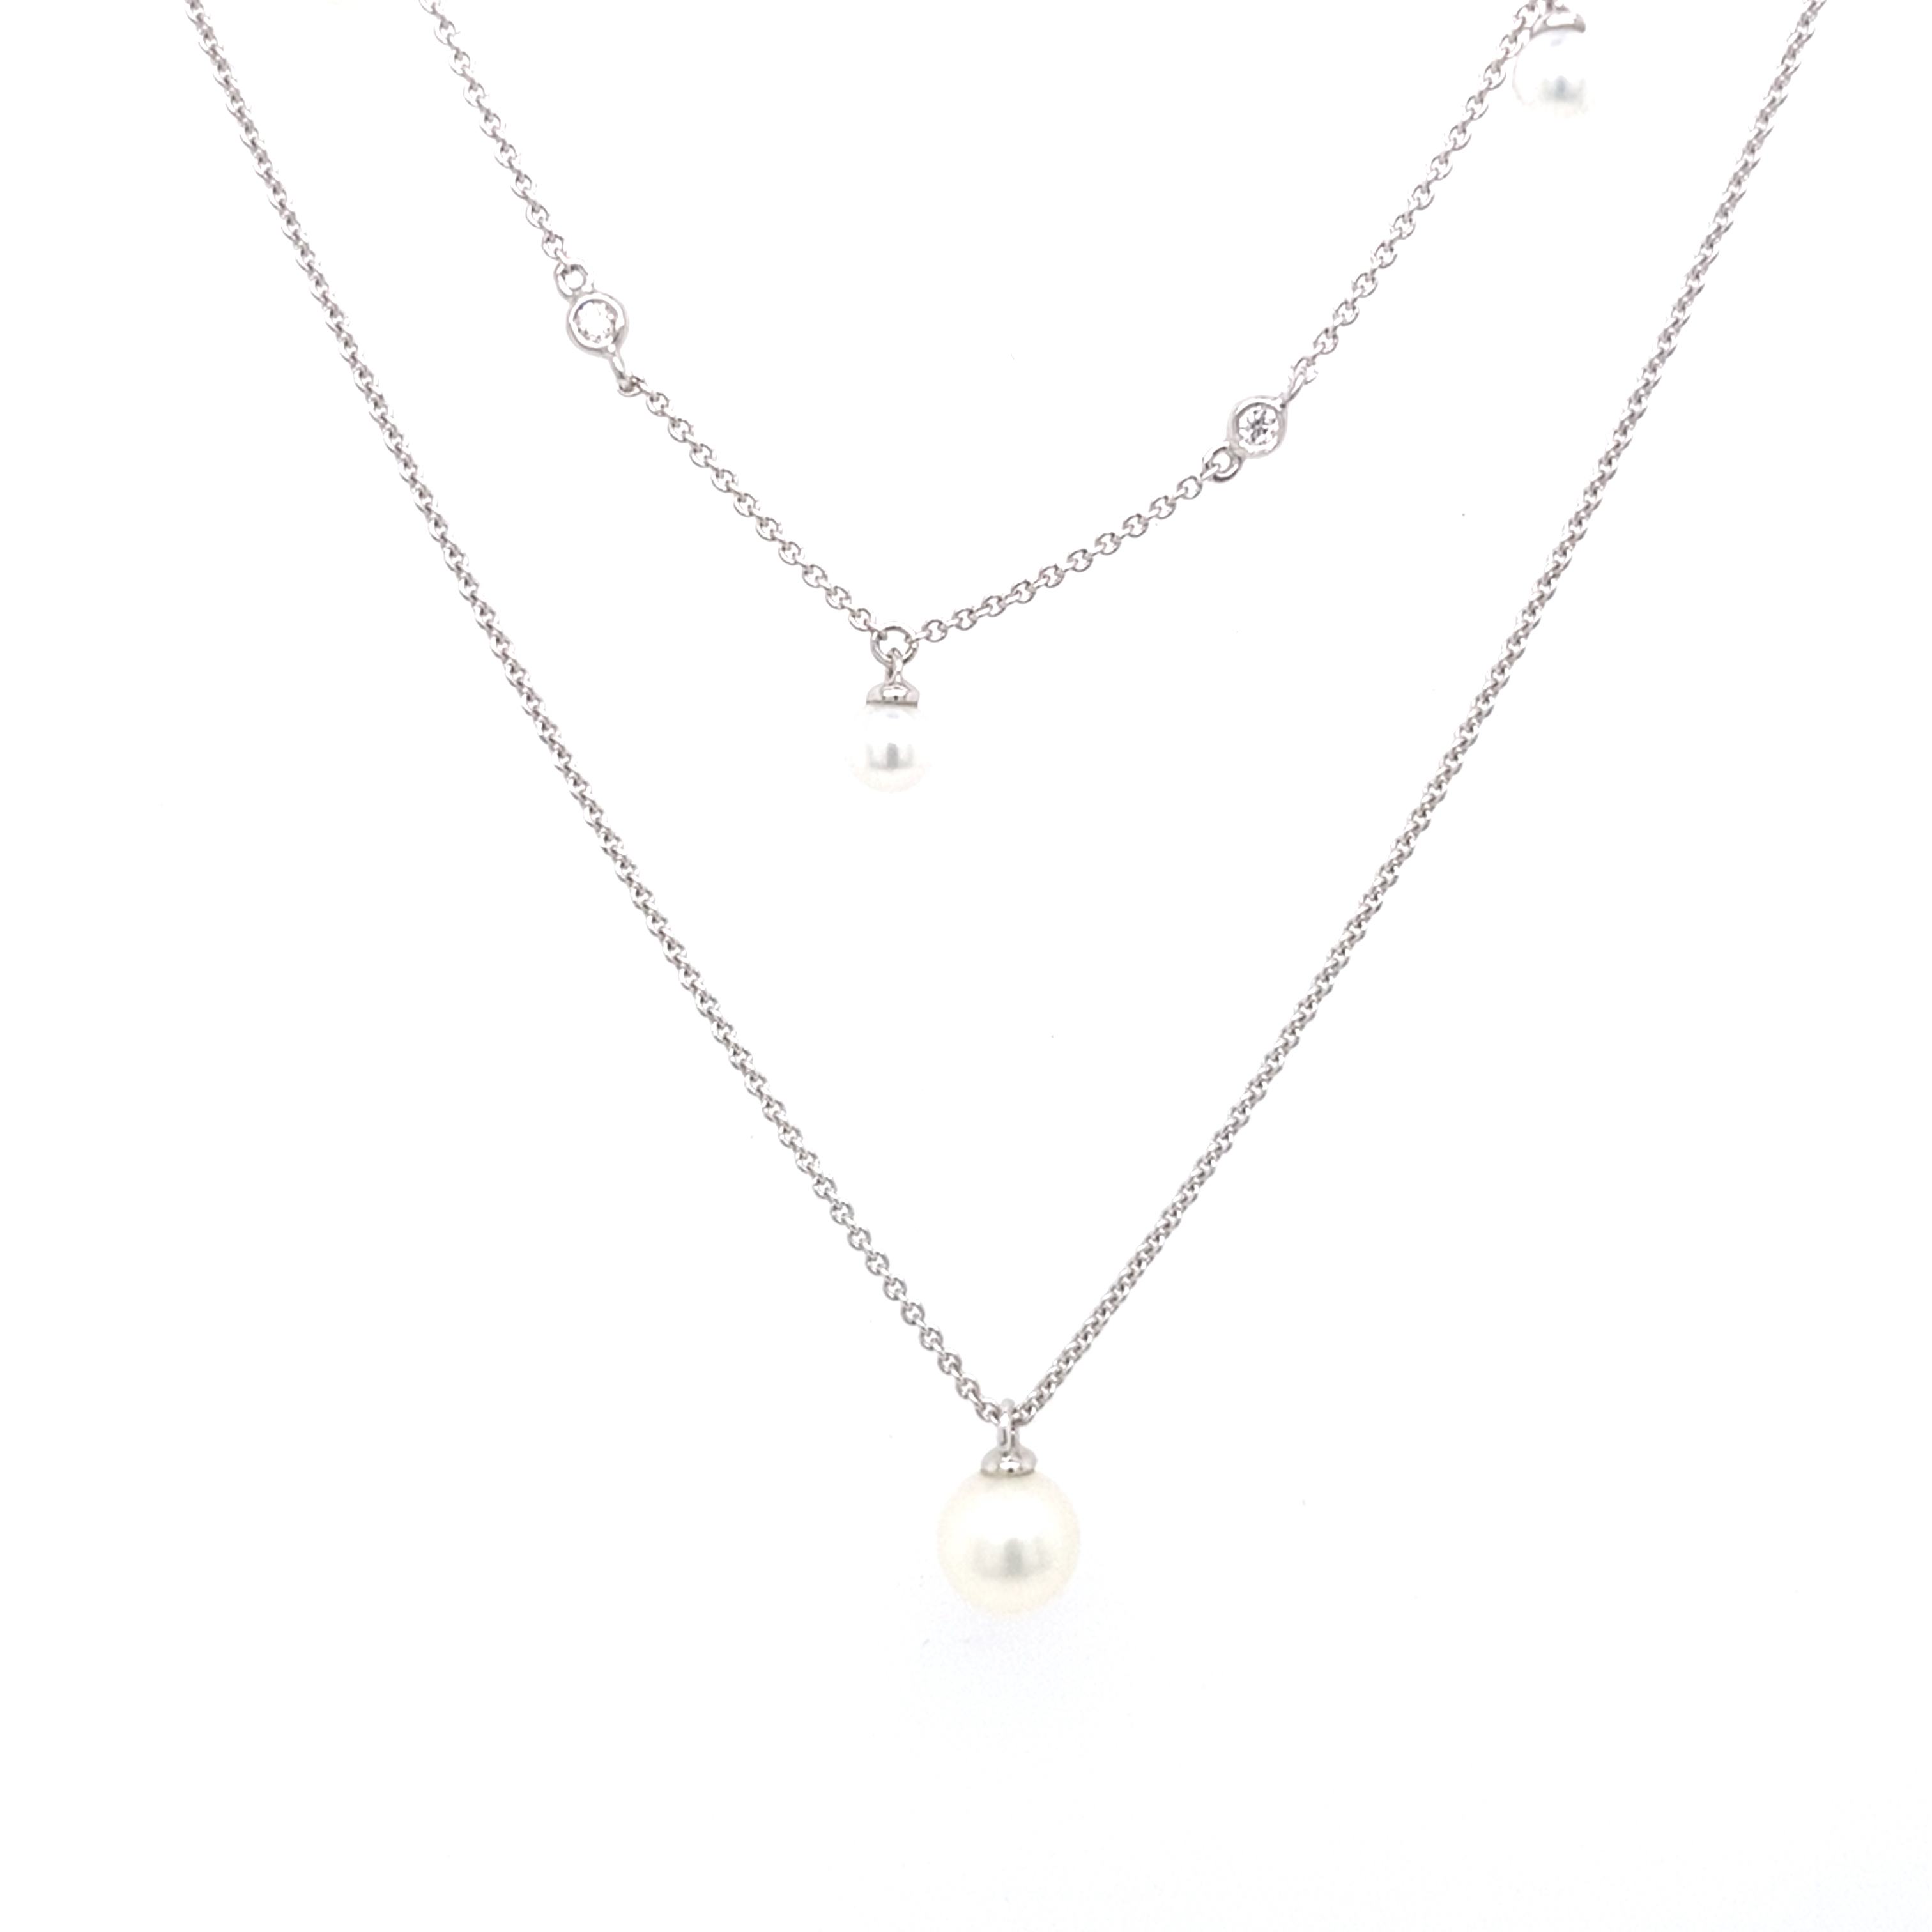 18 Carat White Gold, Pearl and Diamond Necklace